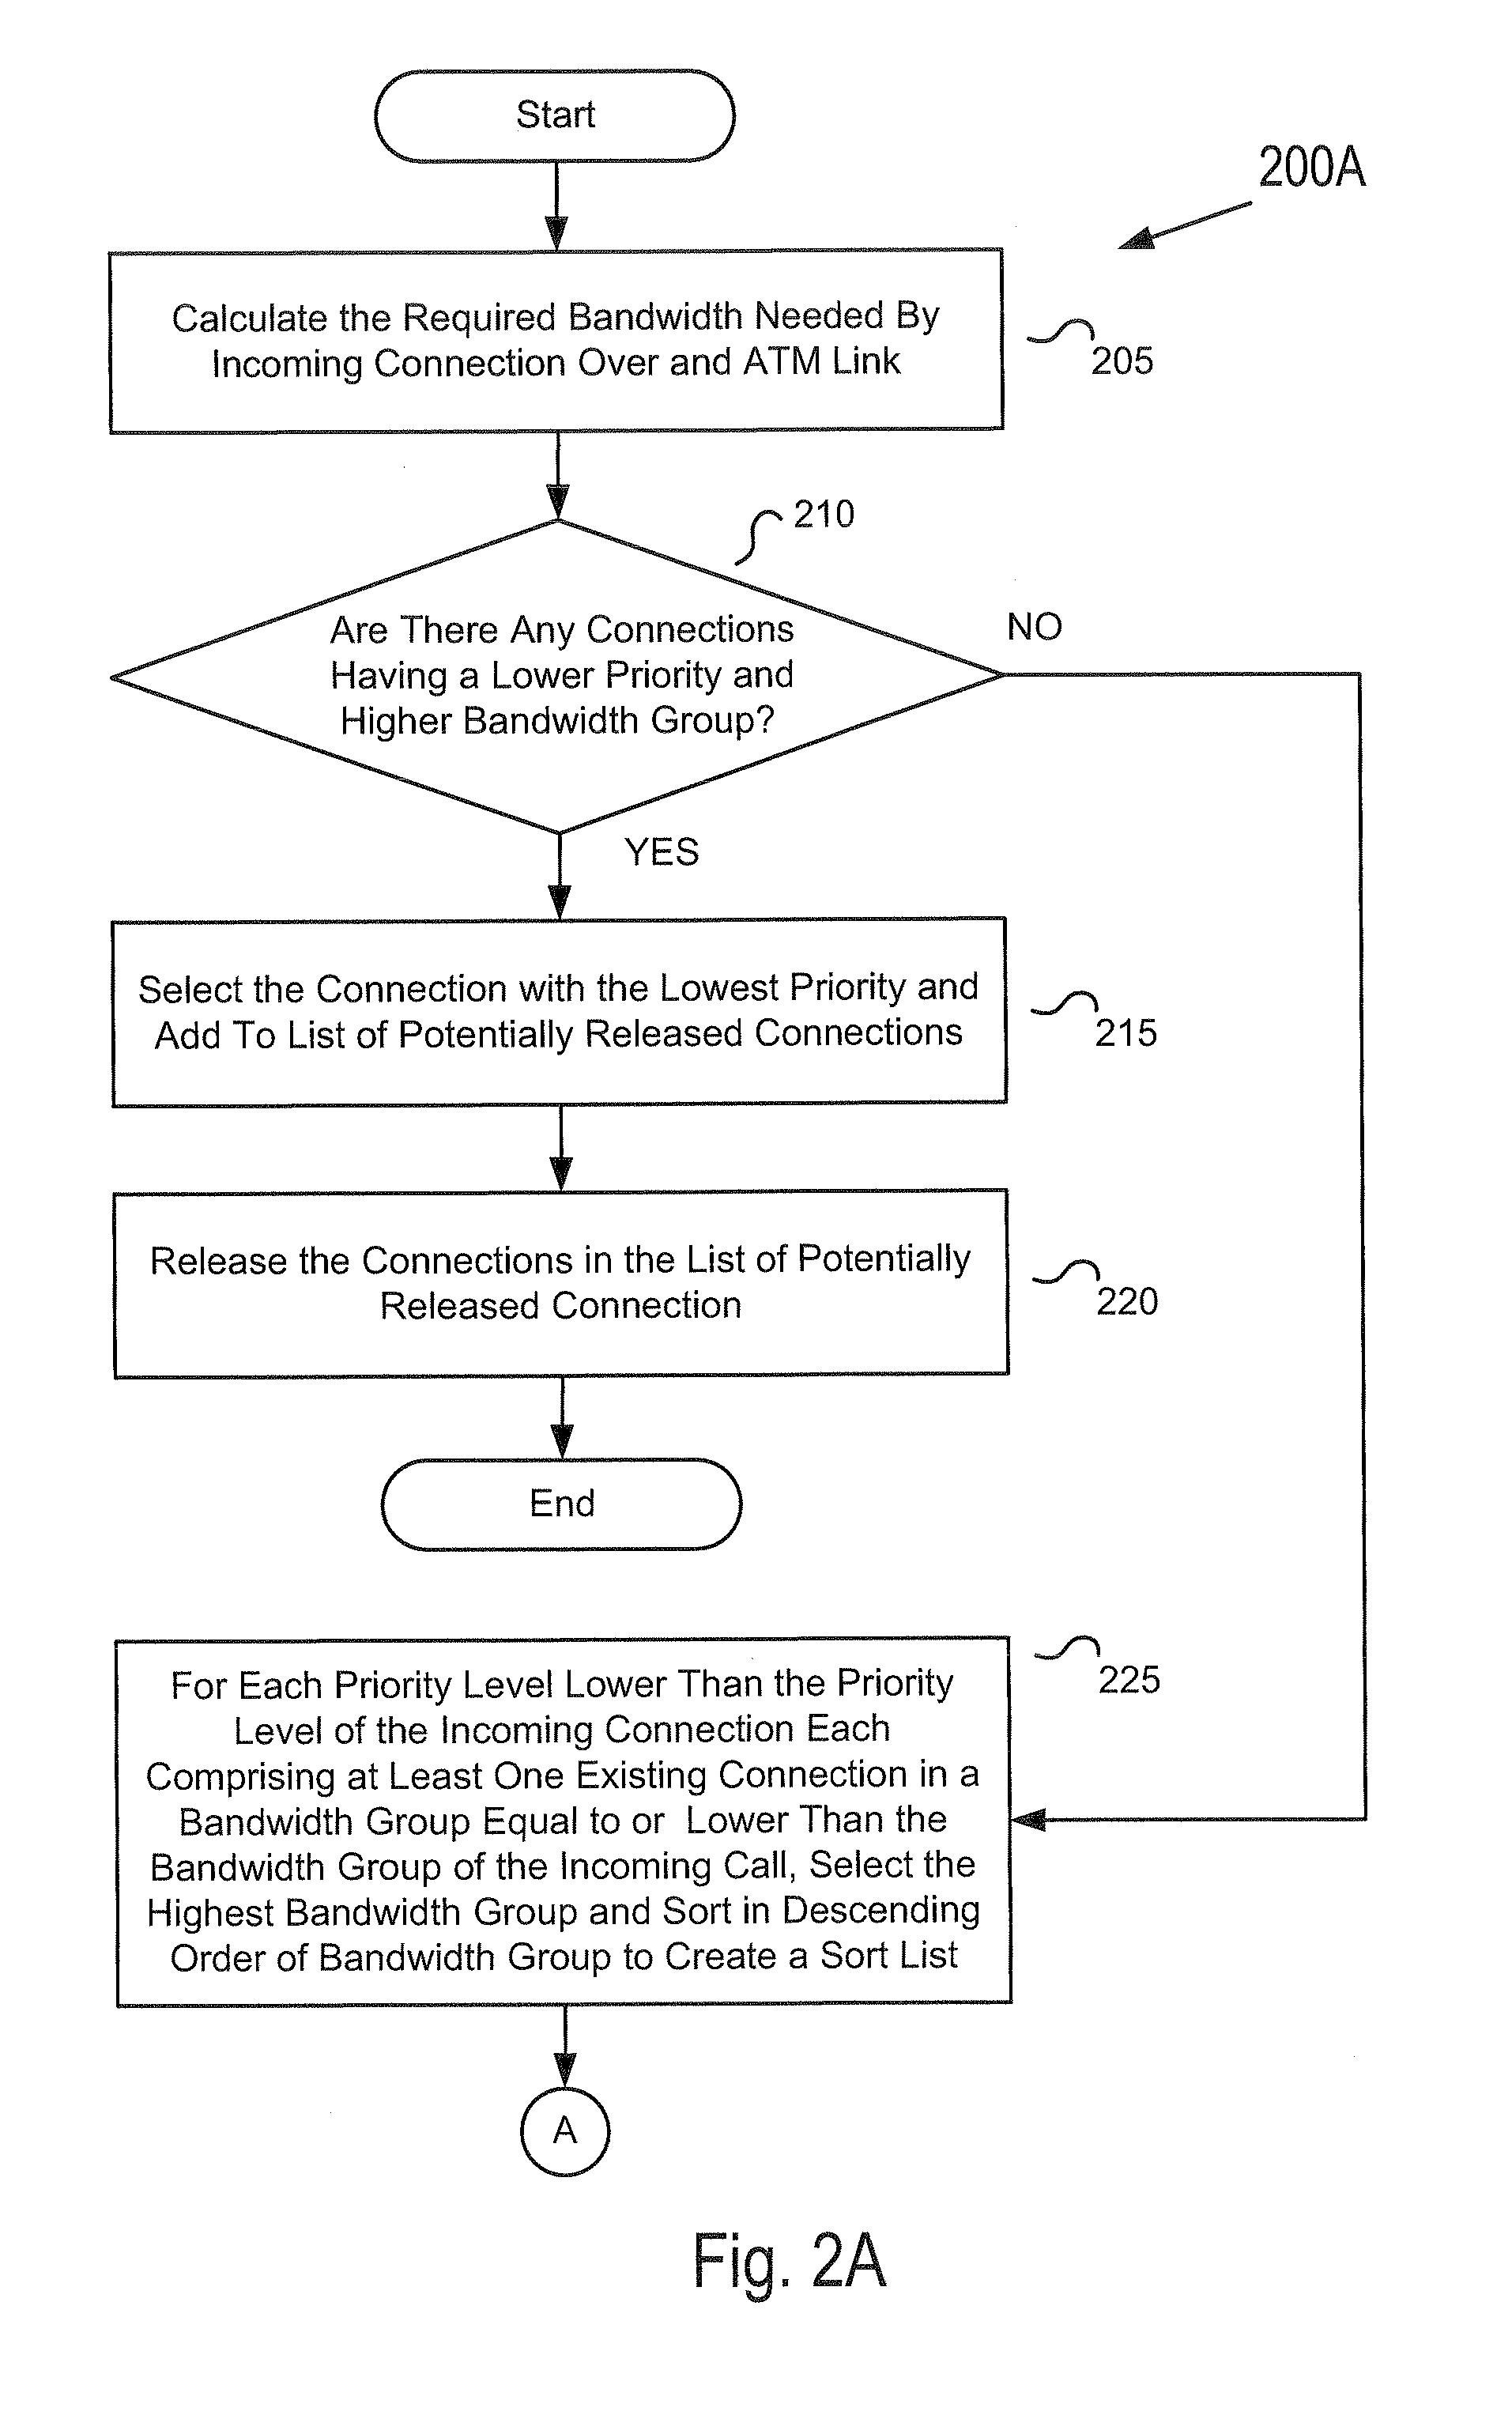 Method and system for selecting connections to bump based on priority in a network